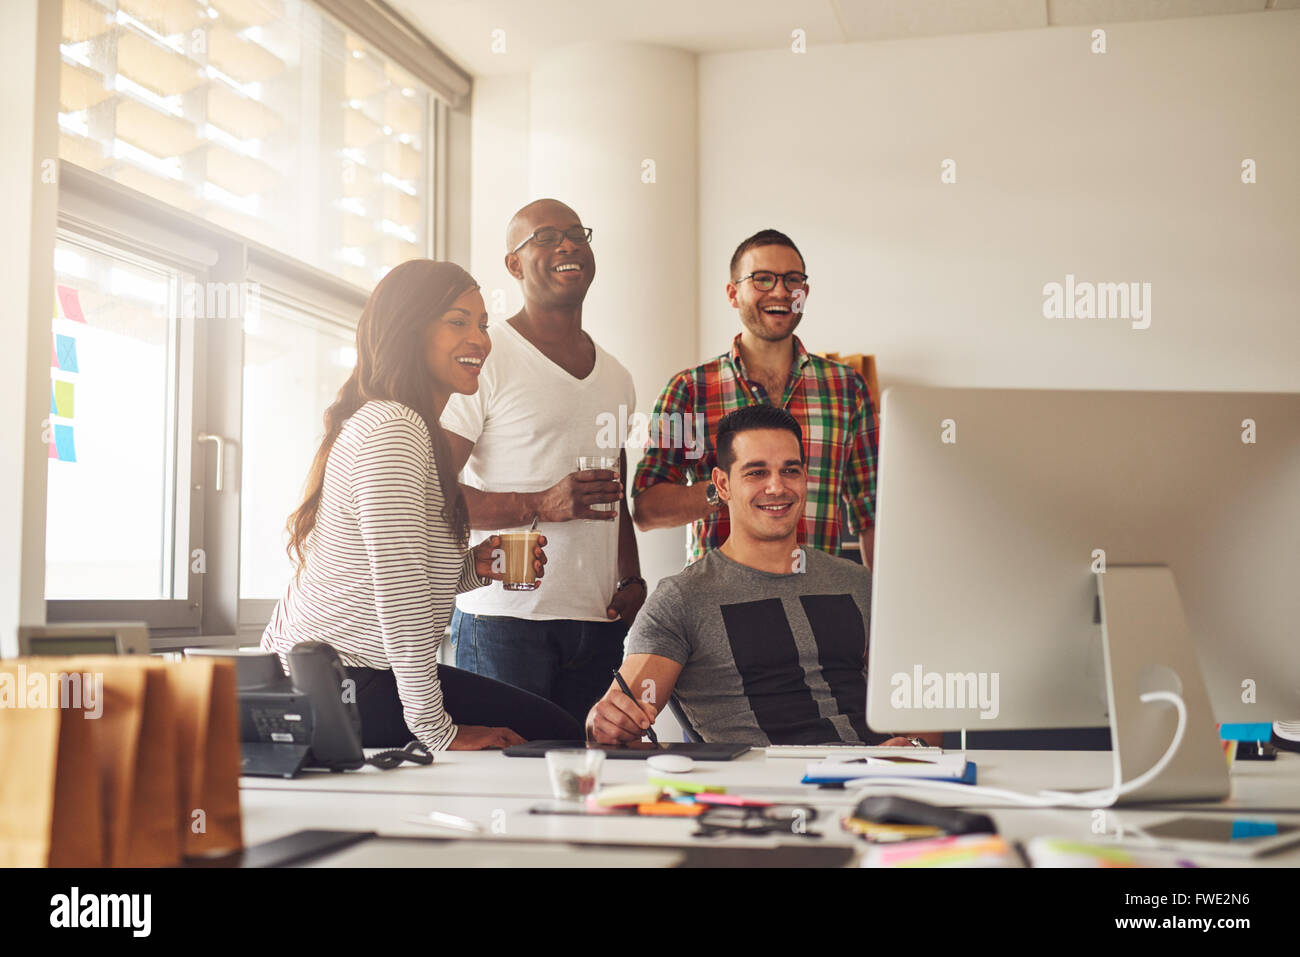 Casually dressed laughing woman and three men holding drinks around computer with stylus and tablet on desk in office Stock Photo